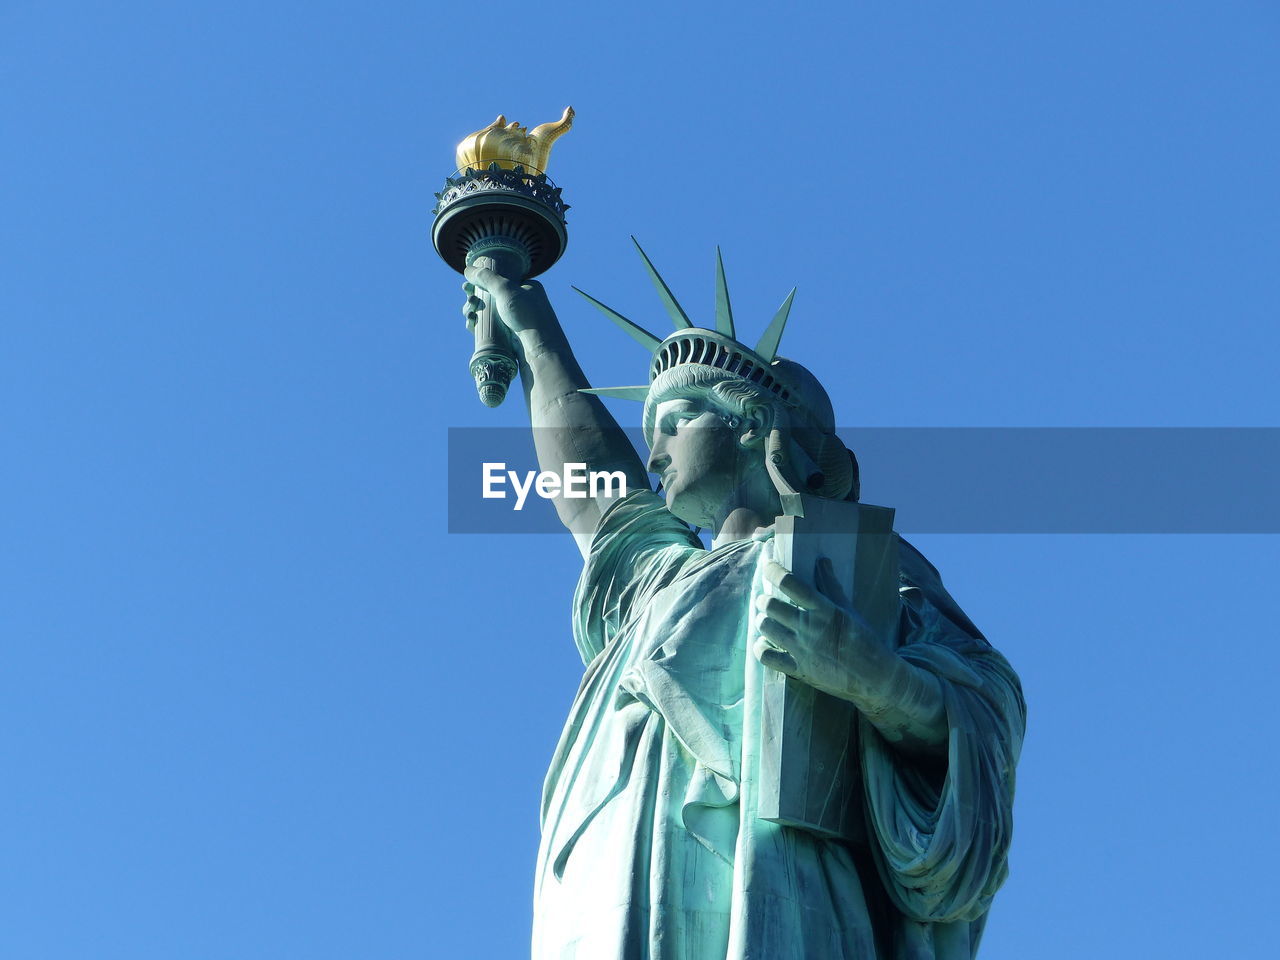 Statue of liberty against clear blue sky